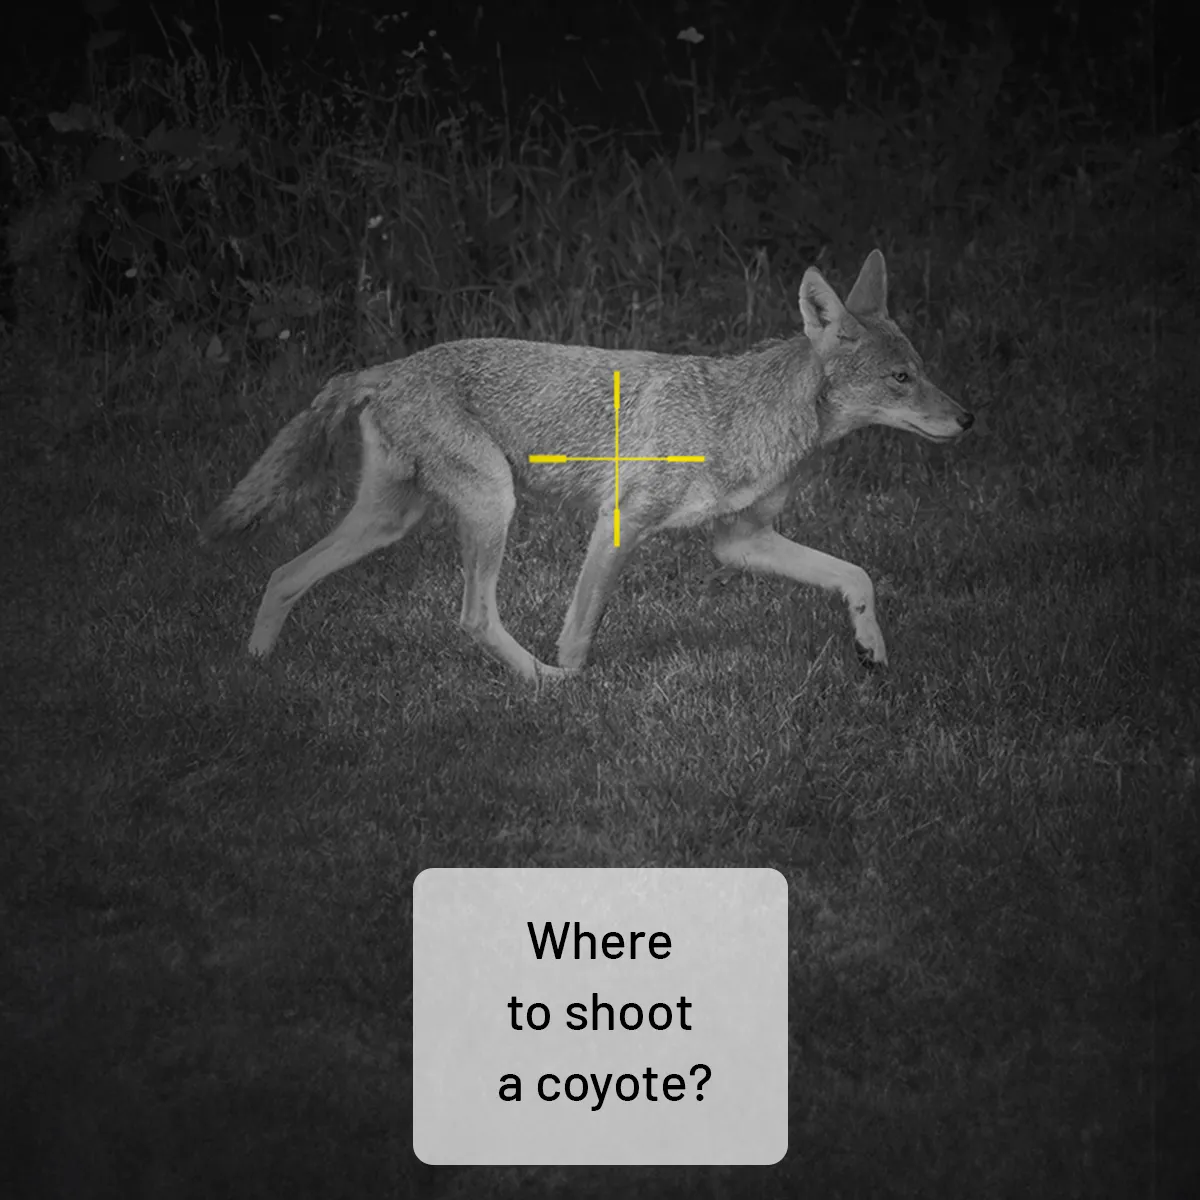 Where to shoot a coyote